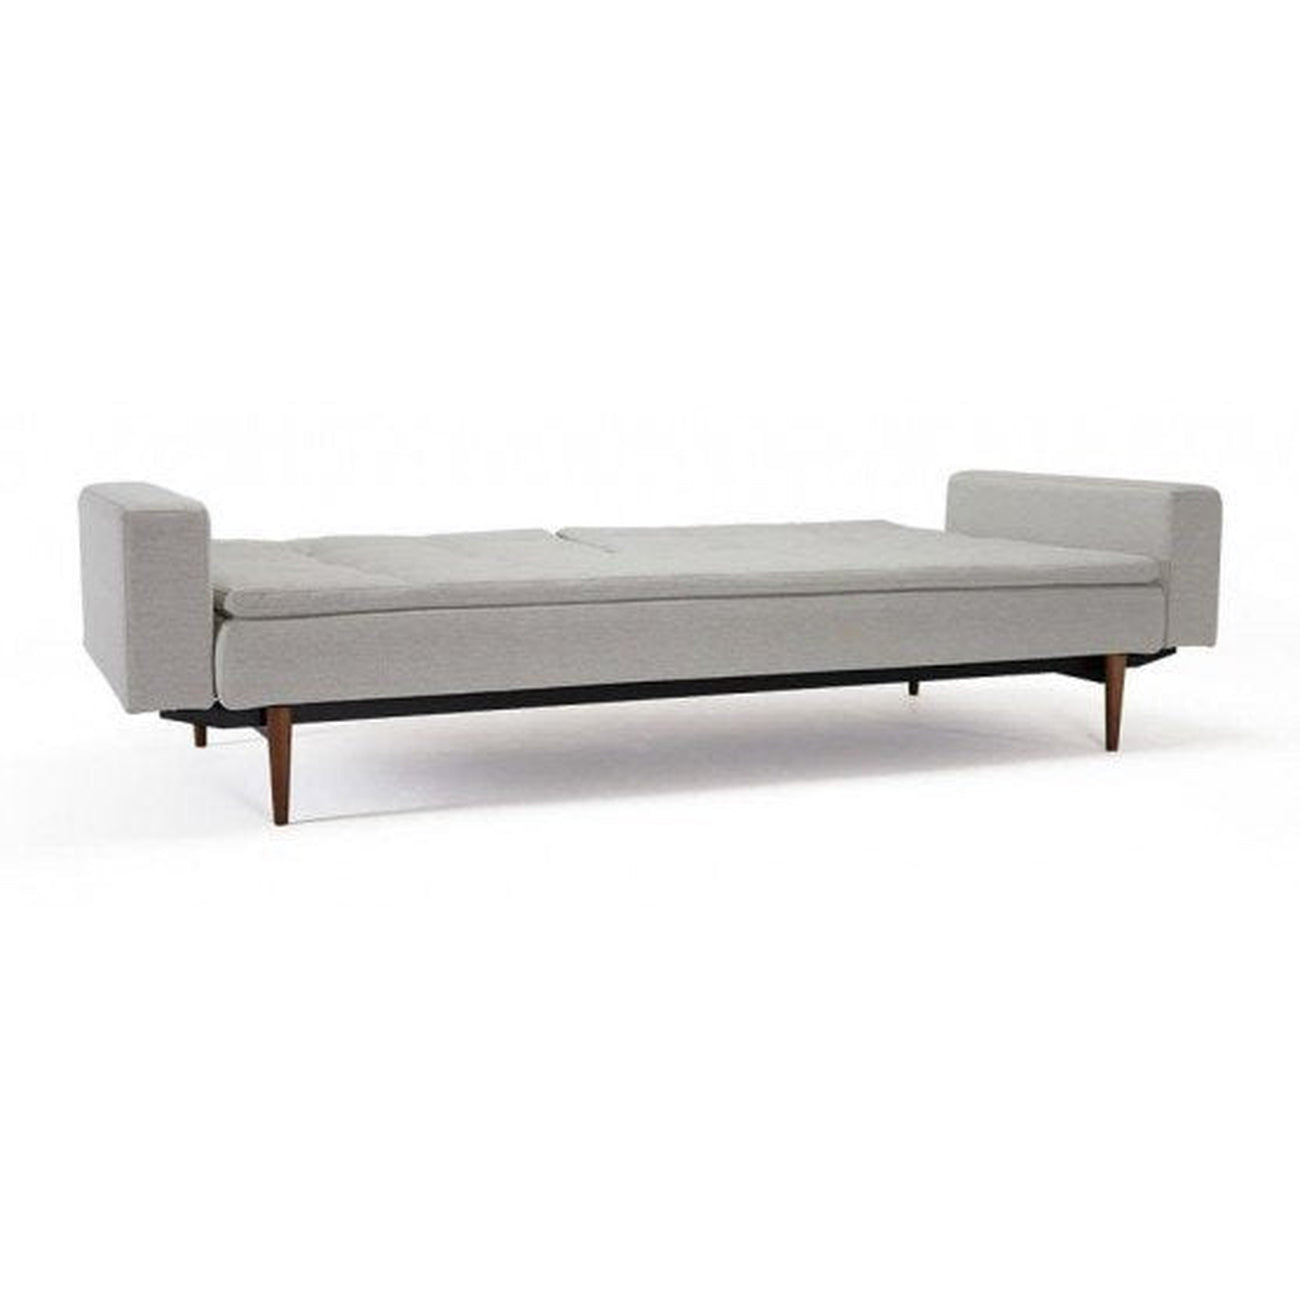 Dublexo Deluxe Sofa W/Arms,DARK WOOD-Innovation Living-INNO-94-741050020527-10-3-SofasMixed Dance Natural-3-France and Son